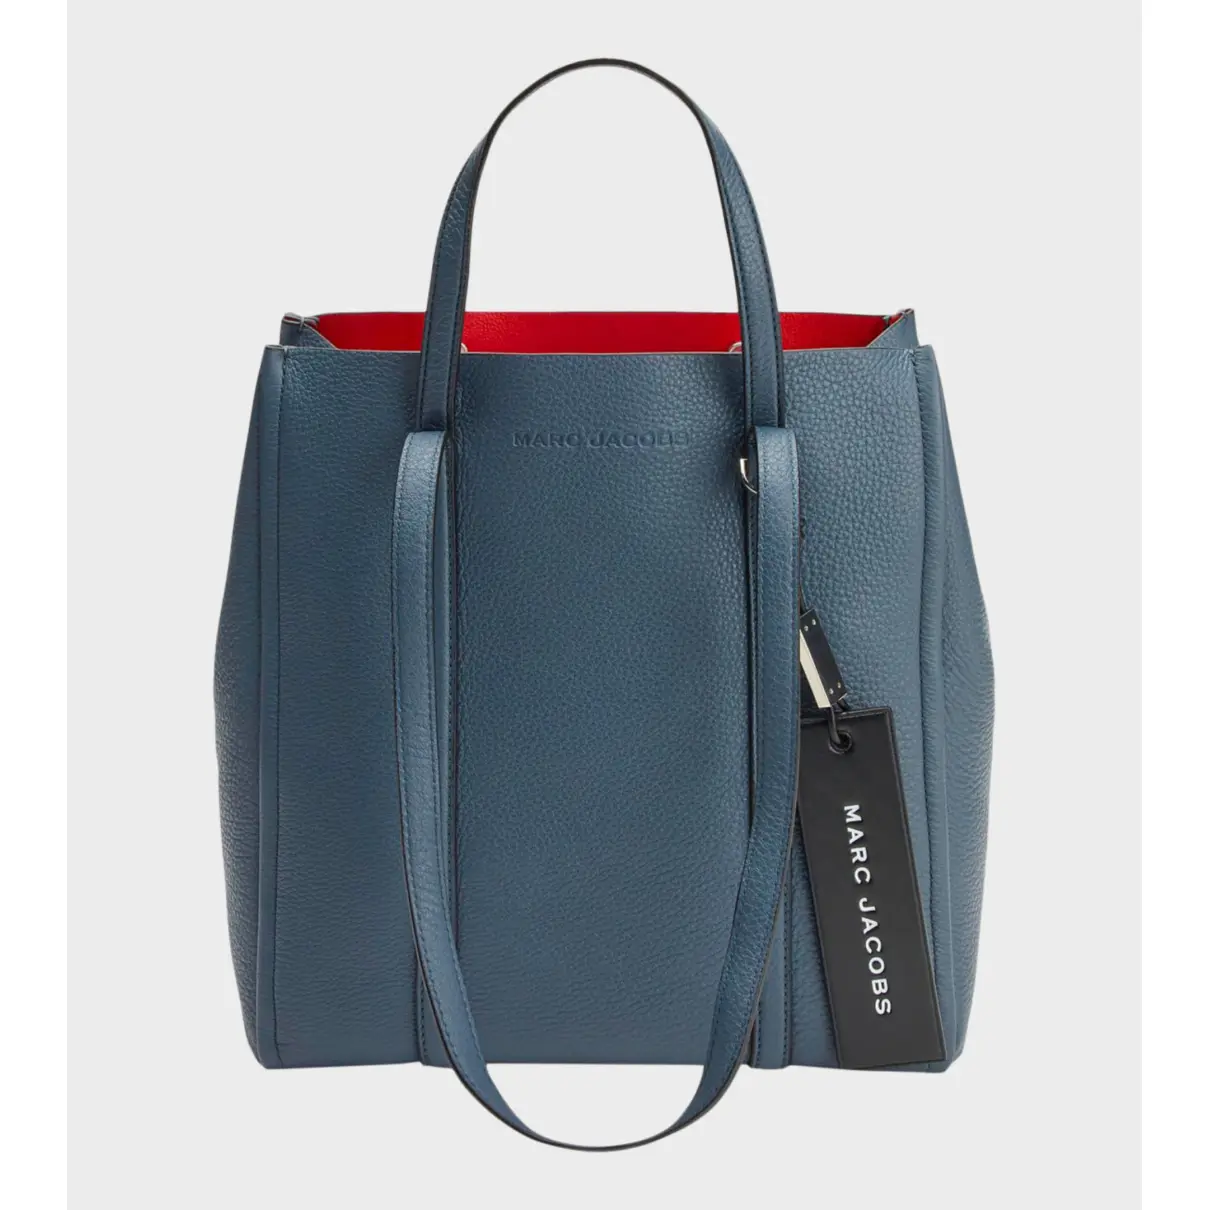 Buy Marc Jacobs The Tag Tote leather handbag online